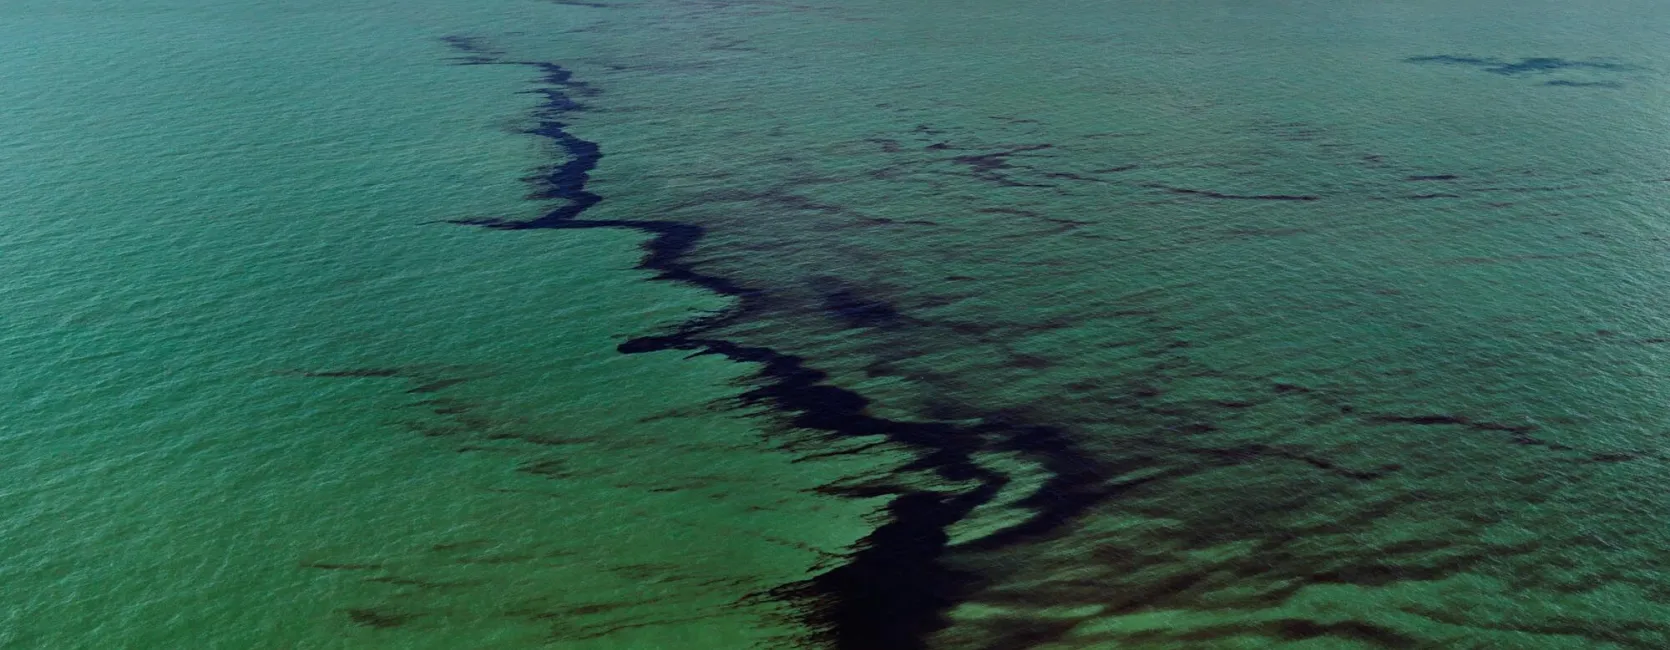 "Oil Spill #10, Oil Slick at Rip Tide, Gulf of Mexico, June 24, 2010" by Edward Burtynsky